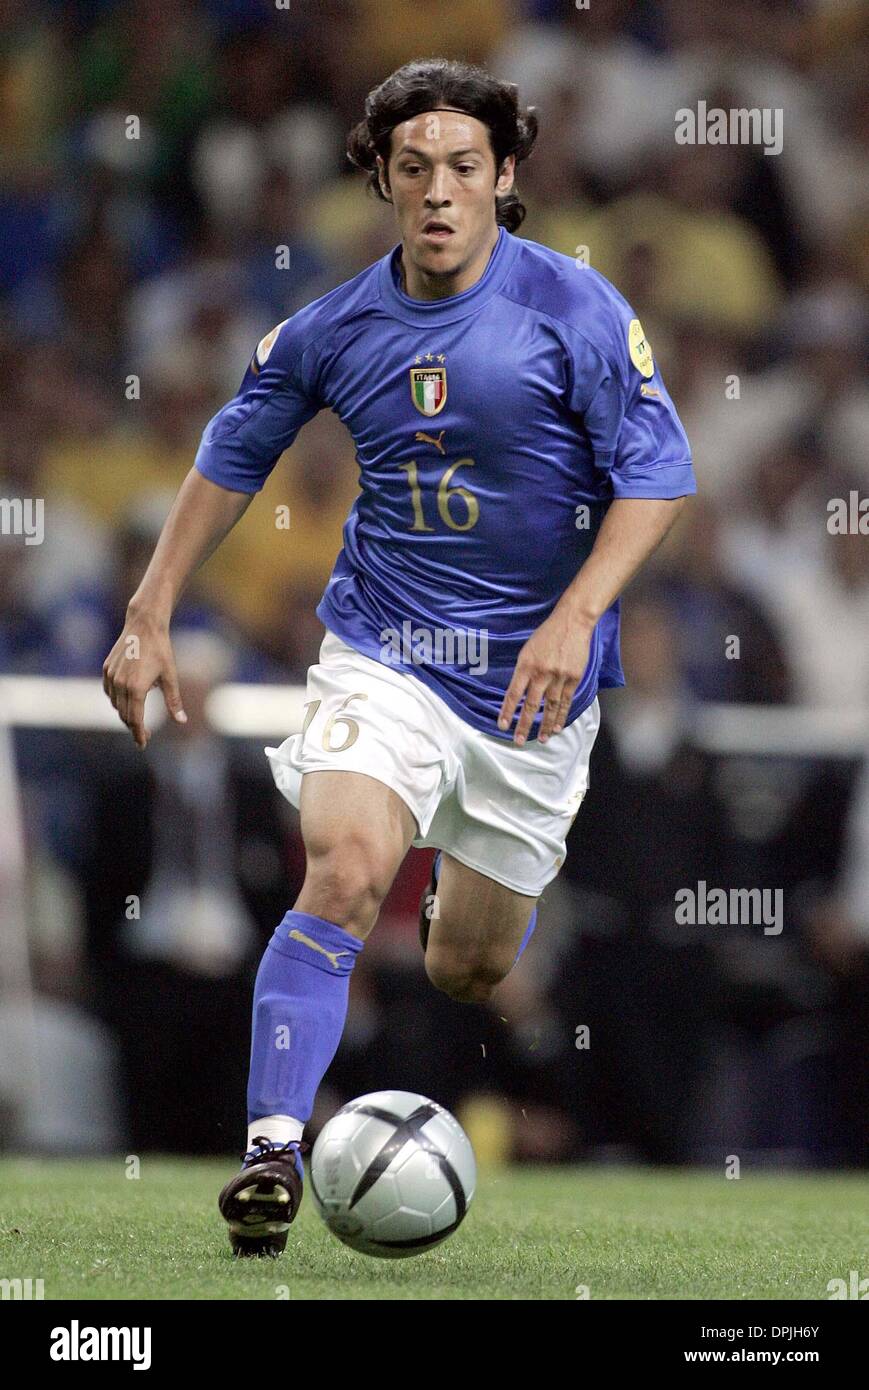 MAURO CAMORANESI.ITALY & JUVENTUS FC.ITALY V SWEDEN EURO 2004.DRAGAO STADIUM, PORTO, PORTUGAL.18/06/2004.DIG24404.K47872.WORLD CUP PREVIEW 2006 Stock Photo